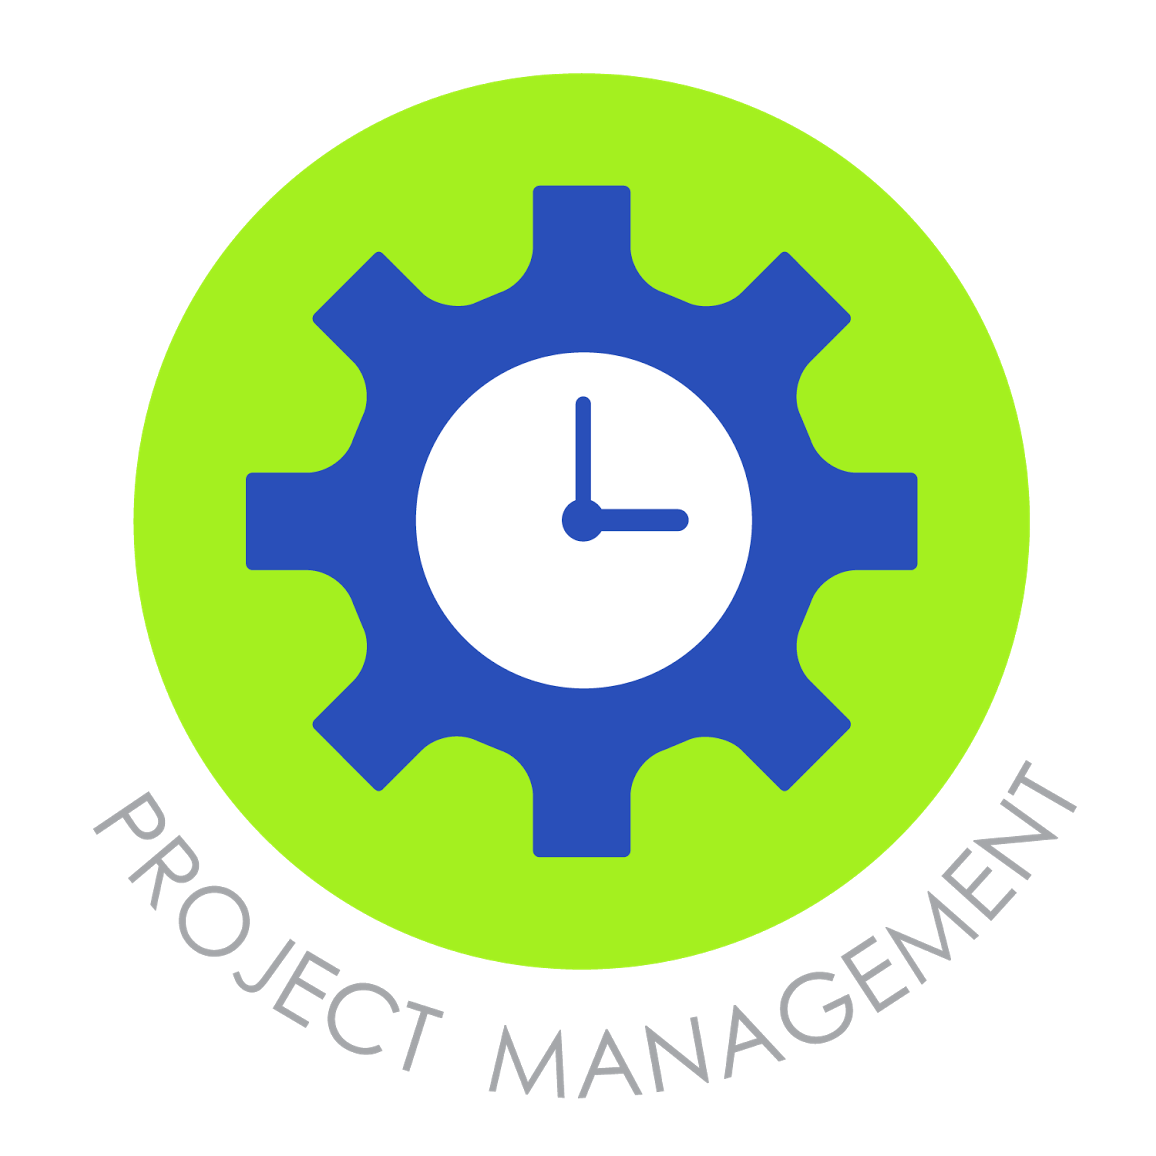 Project Management Logo - Project Management Resources | Research, Accountability & Data Use